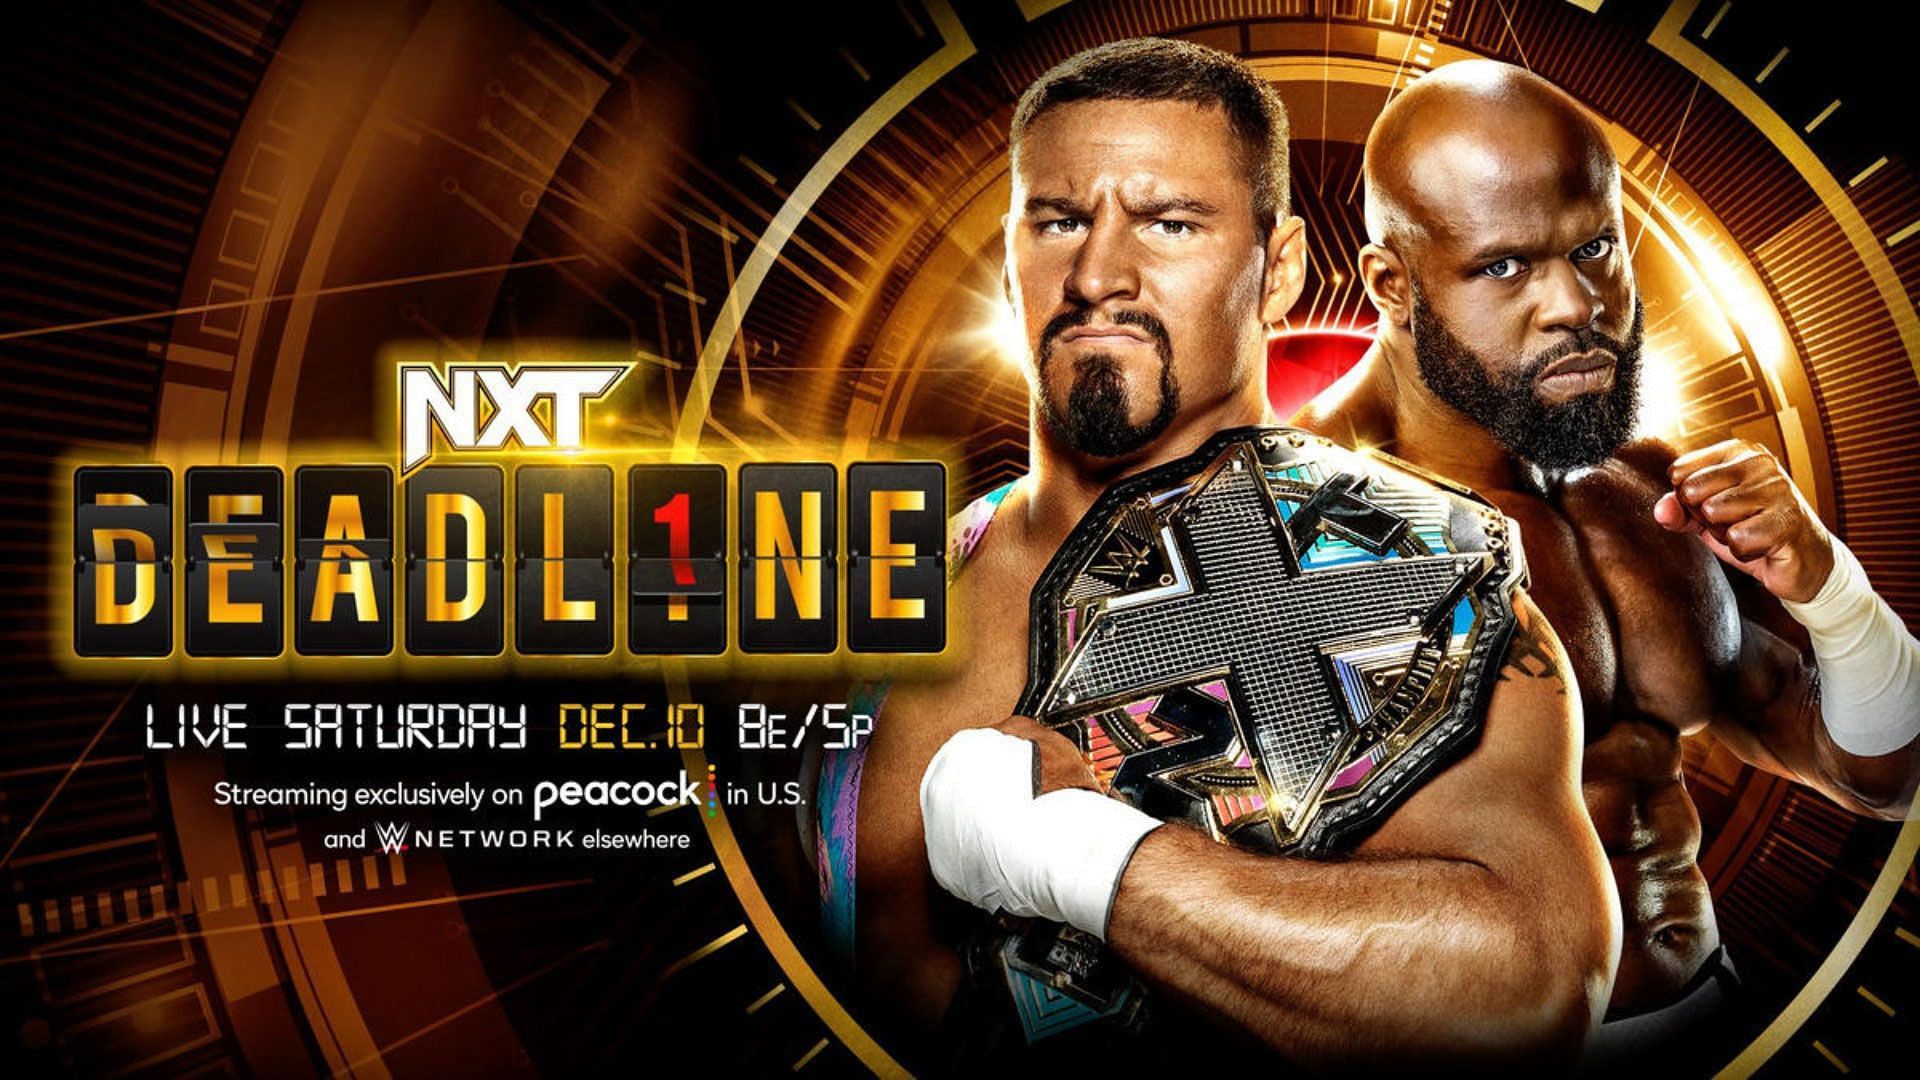 History will be made at NXT Deadline.